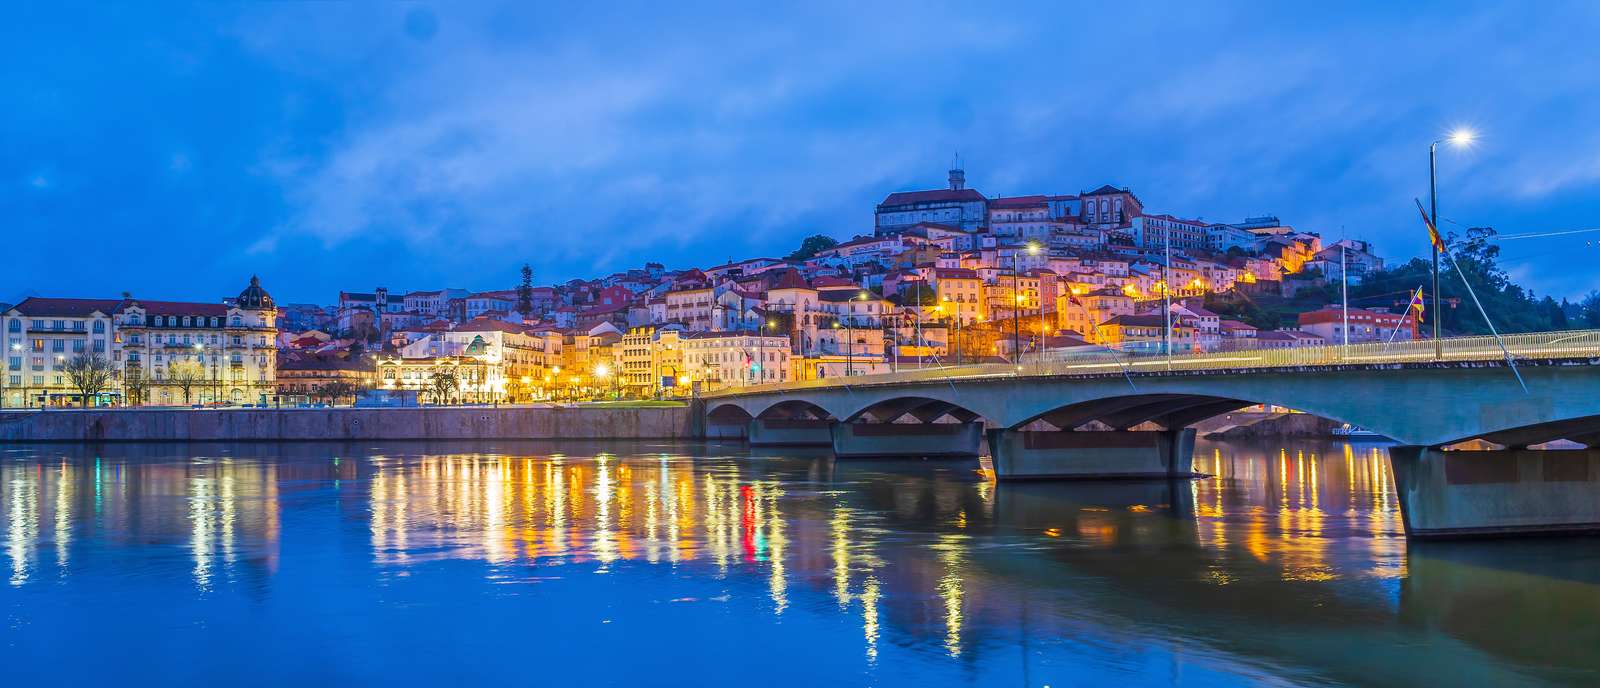 coimbra-1 puzzle online from photo